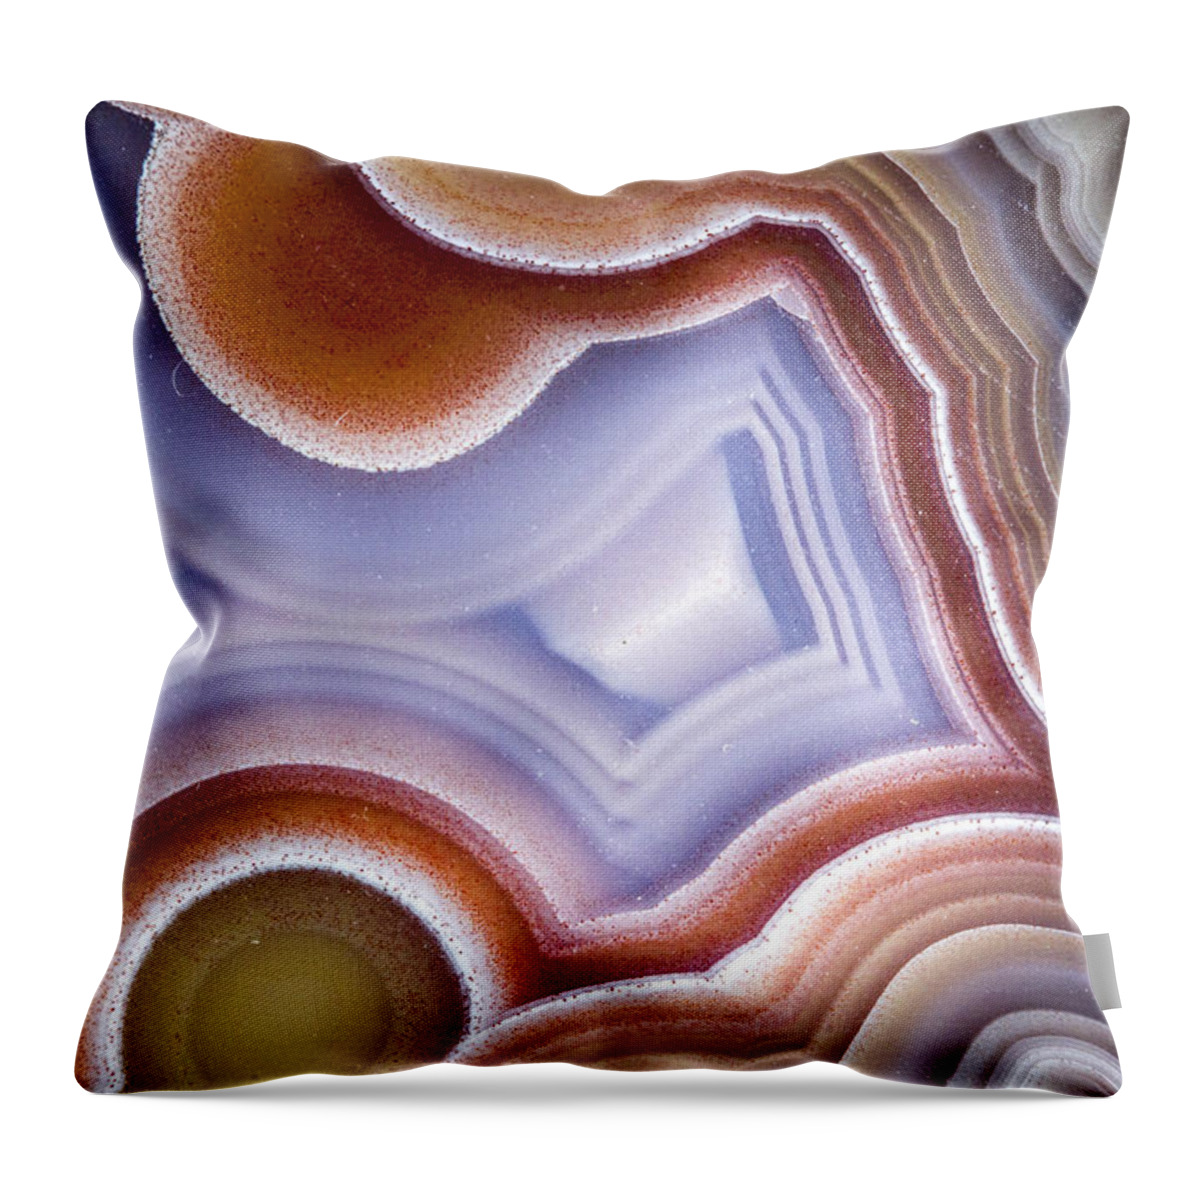 Design Throw Pillow featuring the photograph Rock Star 2 by Jean Noren